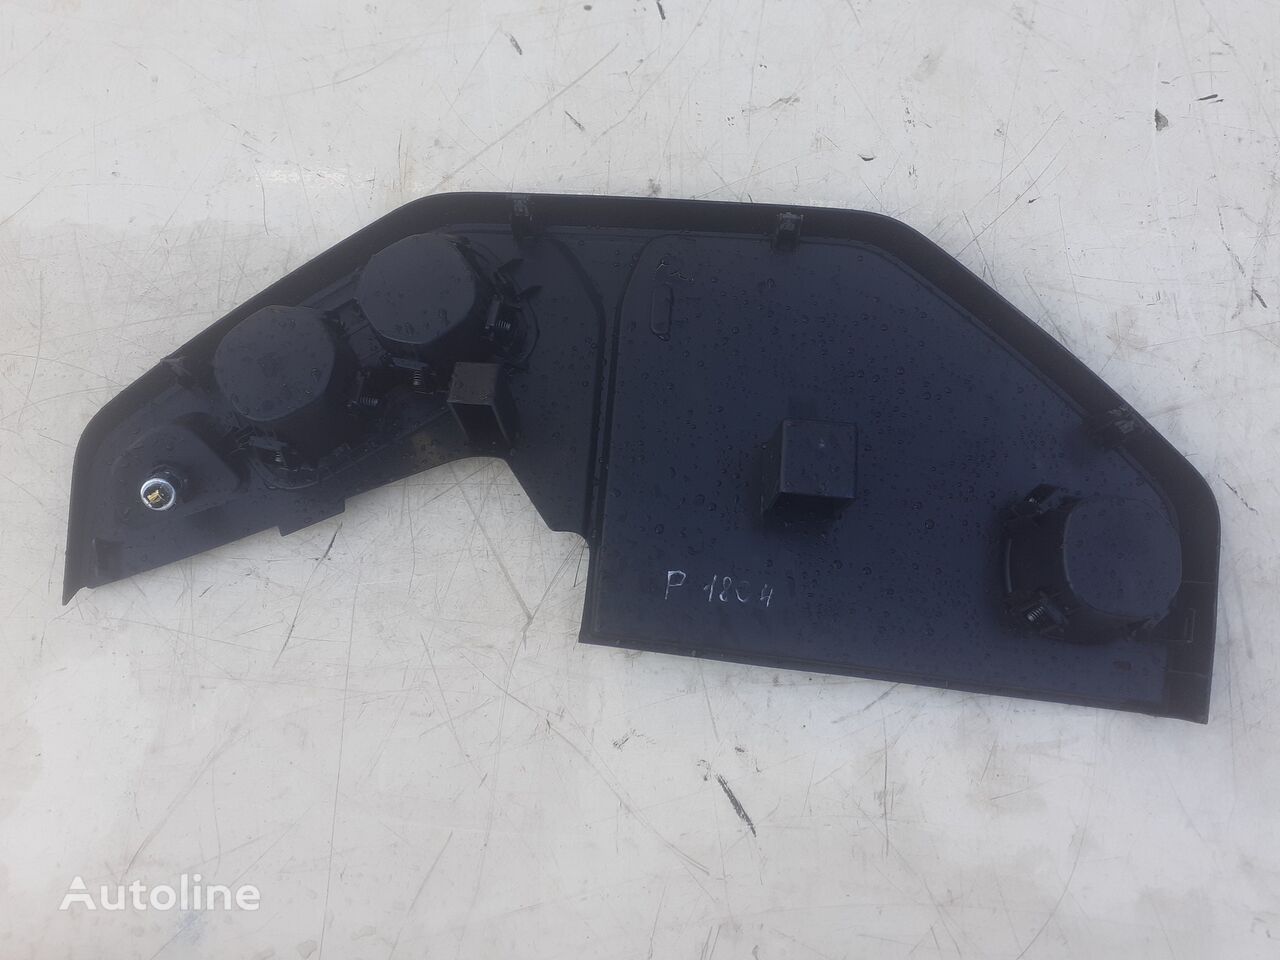 Cup Holder Scania P450 for Scania L,P,G,R,S series truck